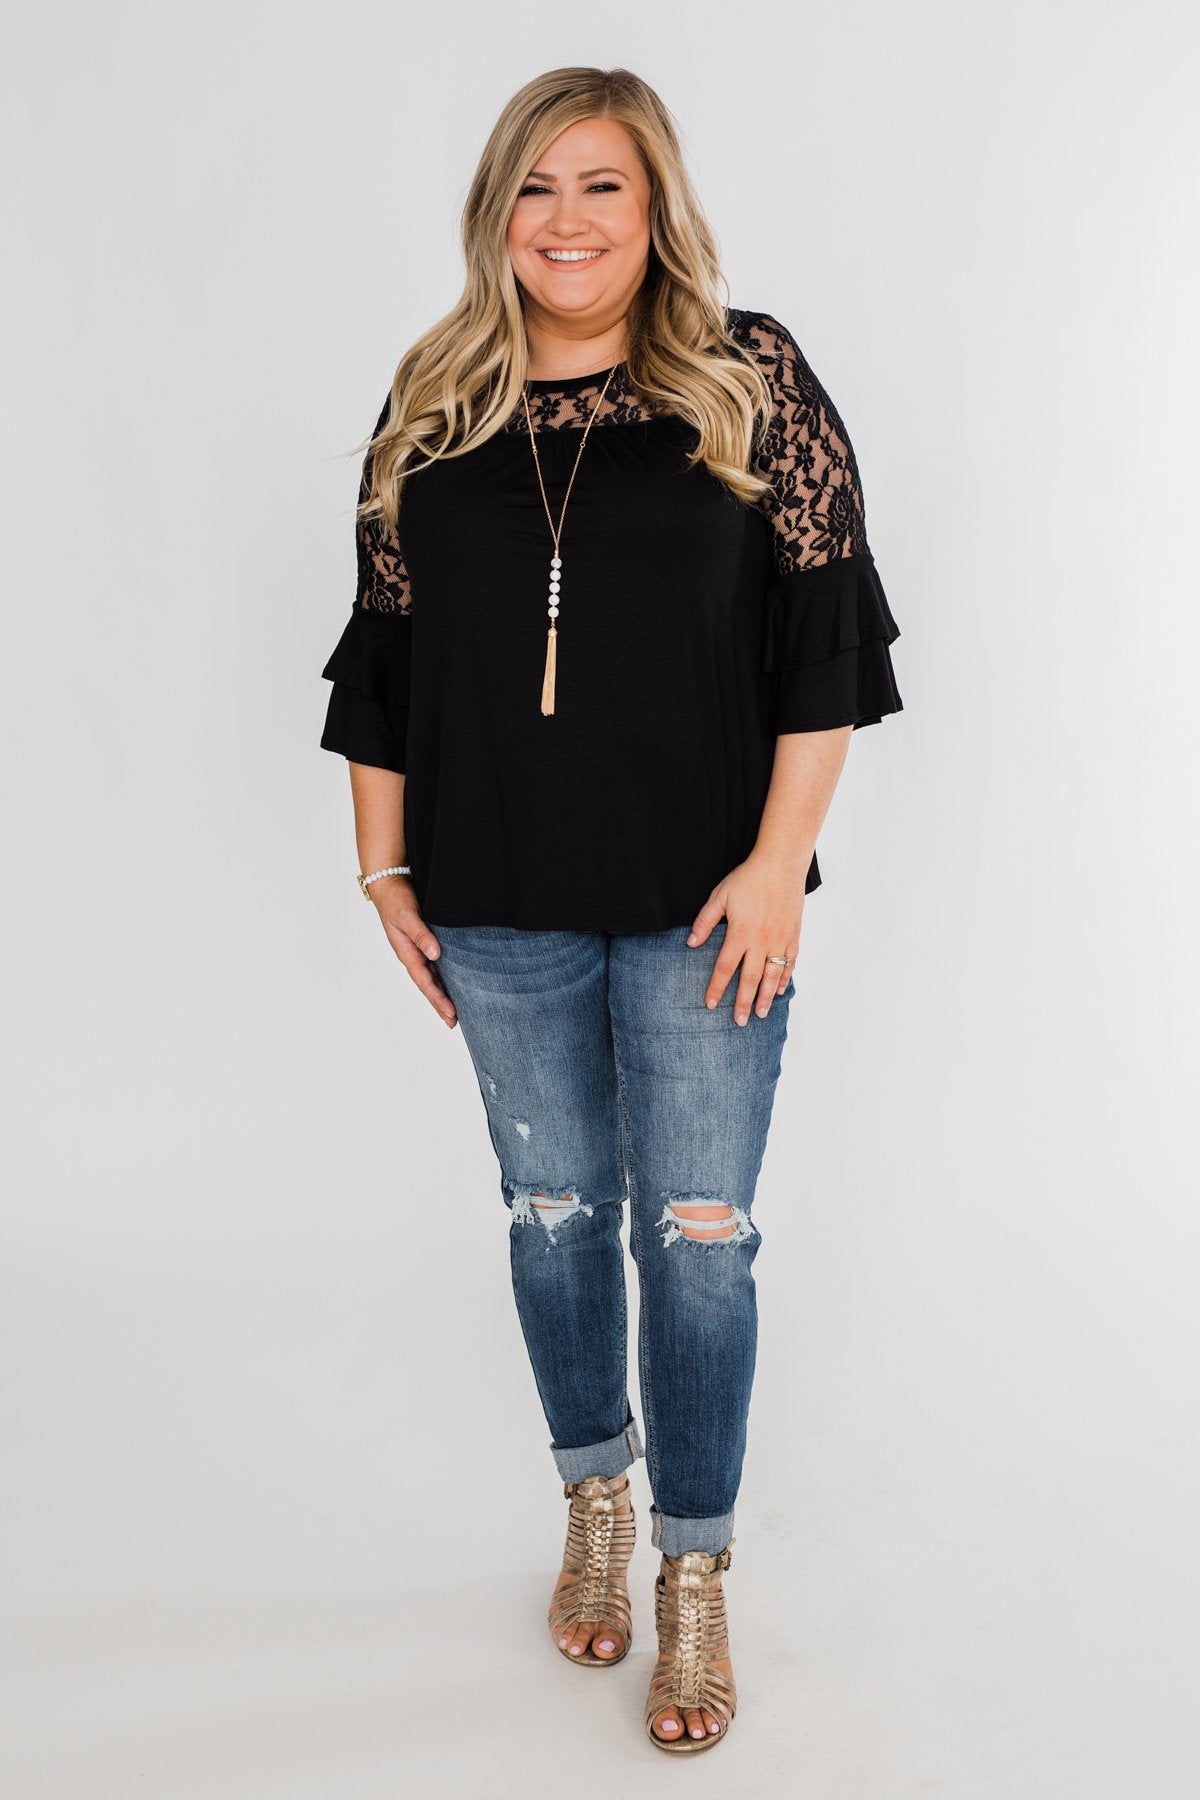 Right Beside Me Lace & Ruffles Top- Black